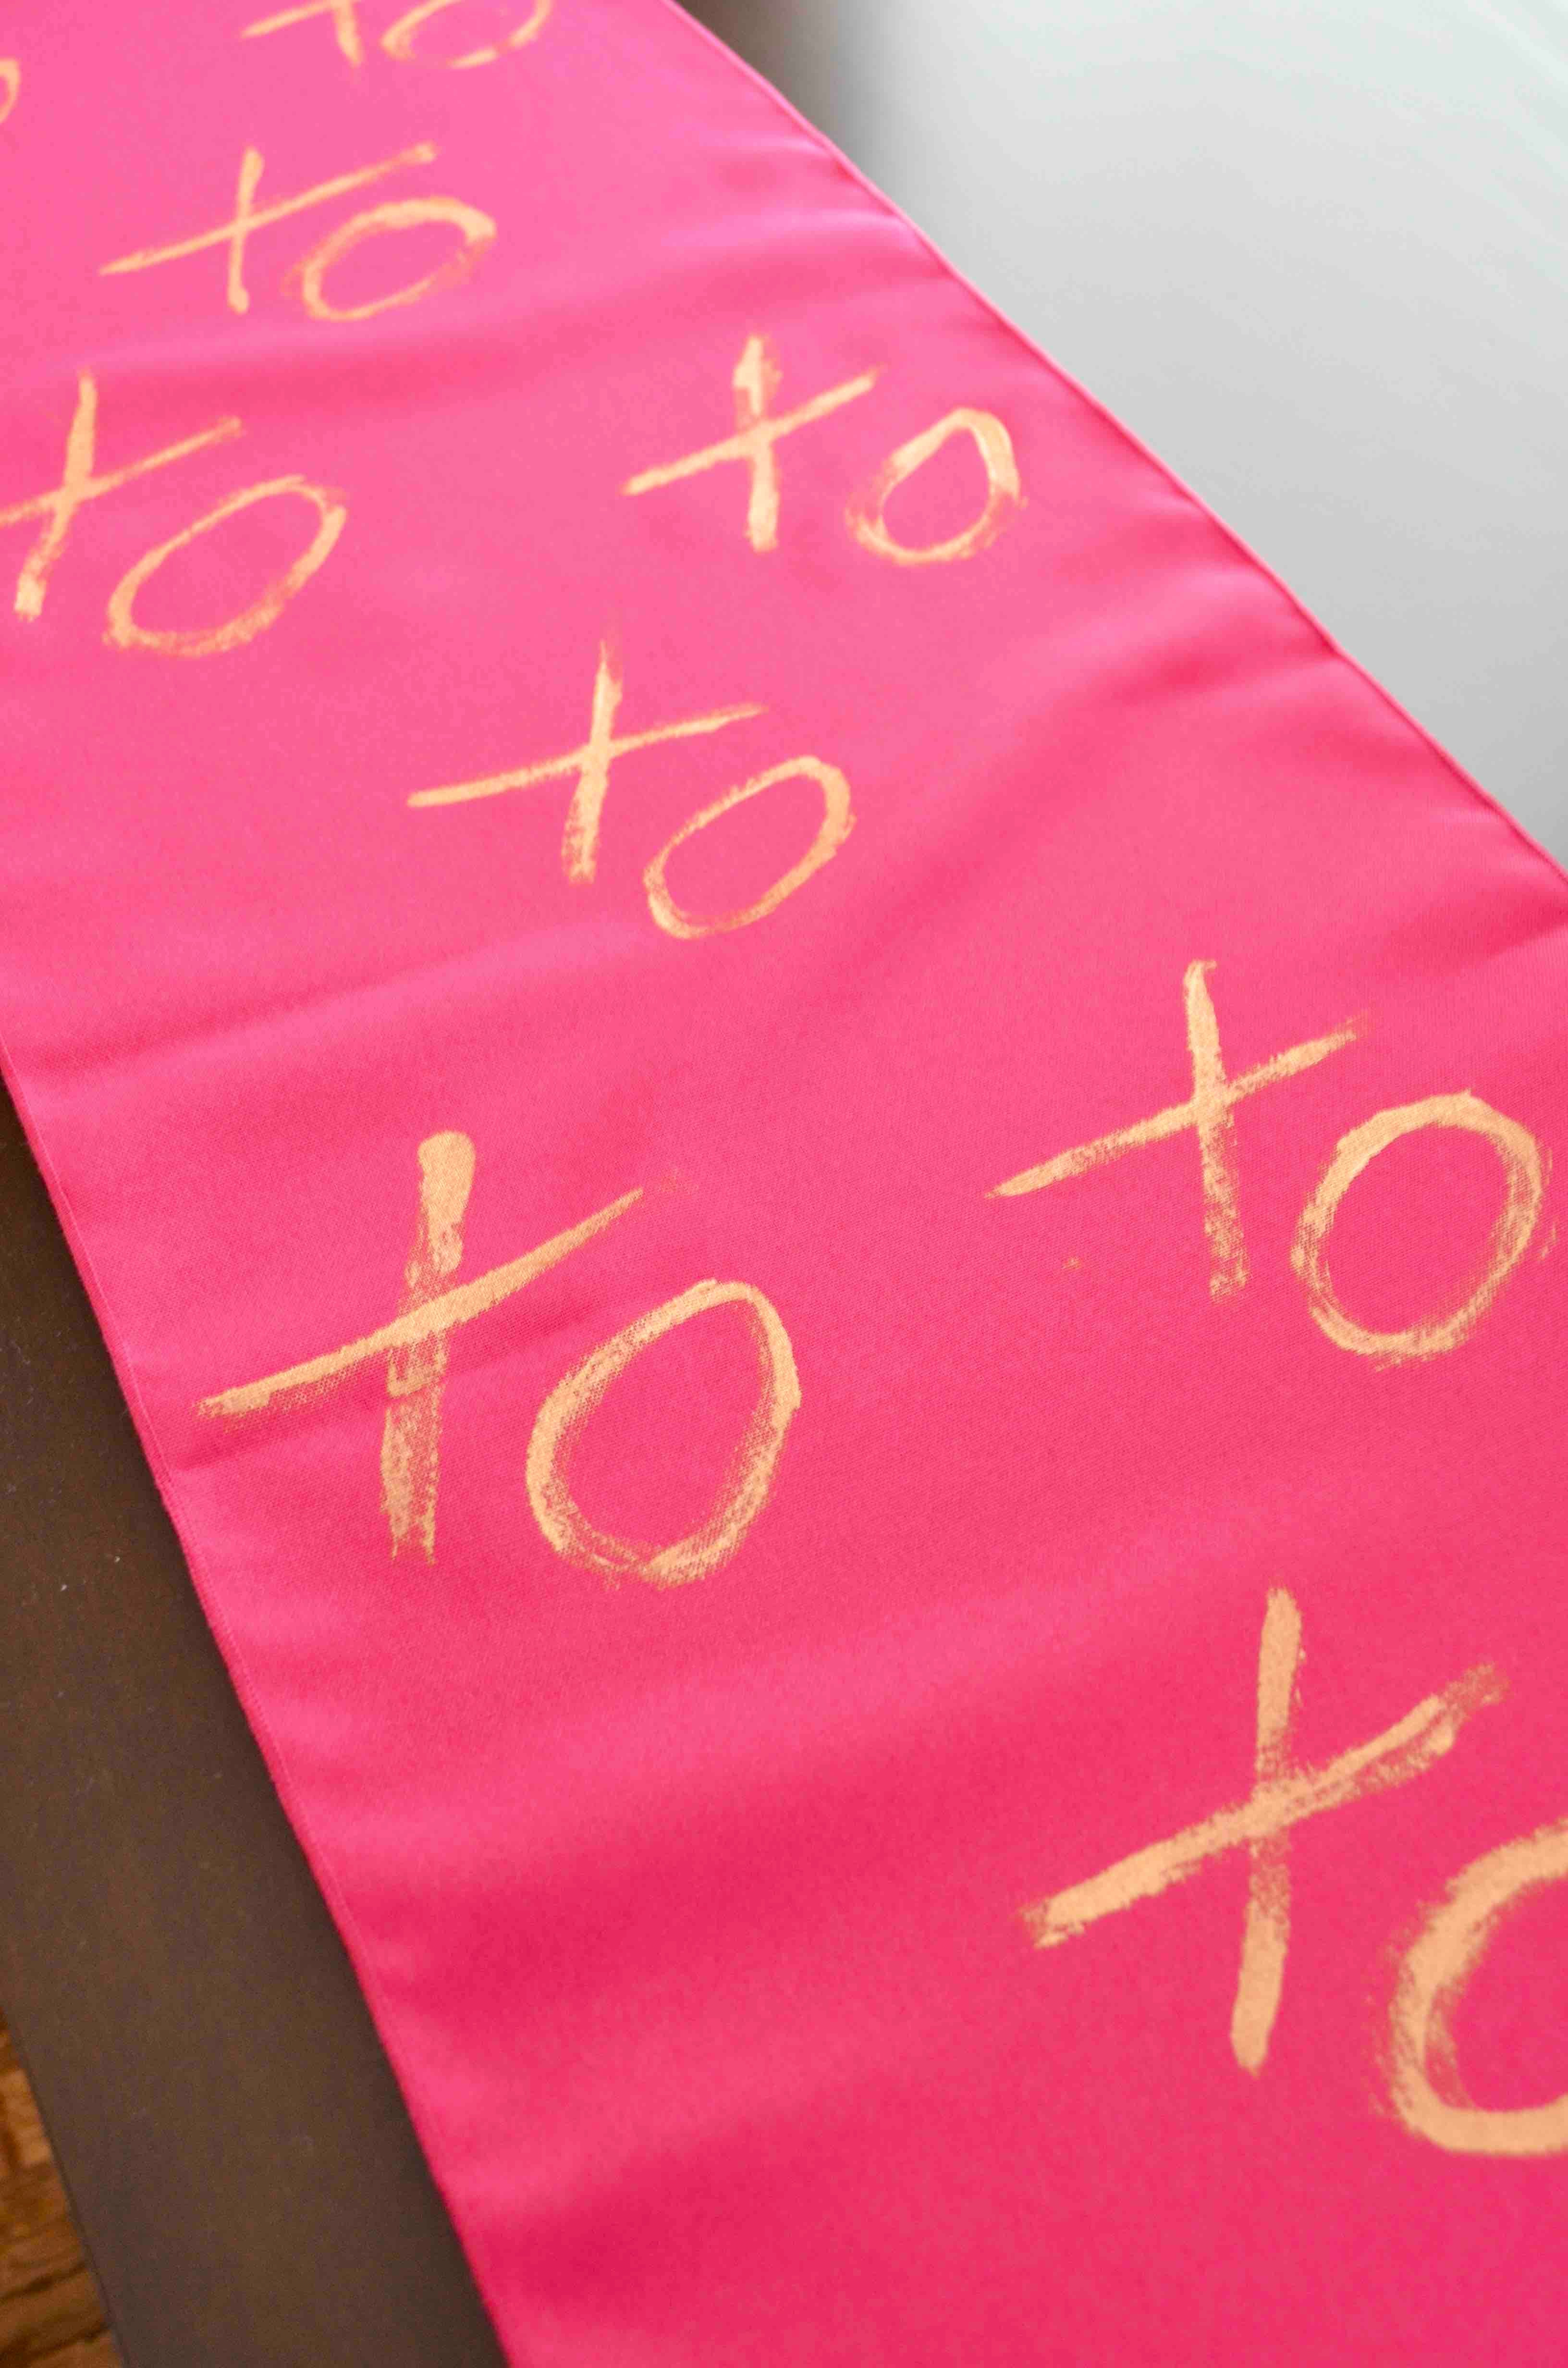 DIY XOXO Tablecloth and Table Runner For Valentine's Day